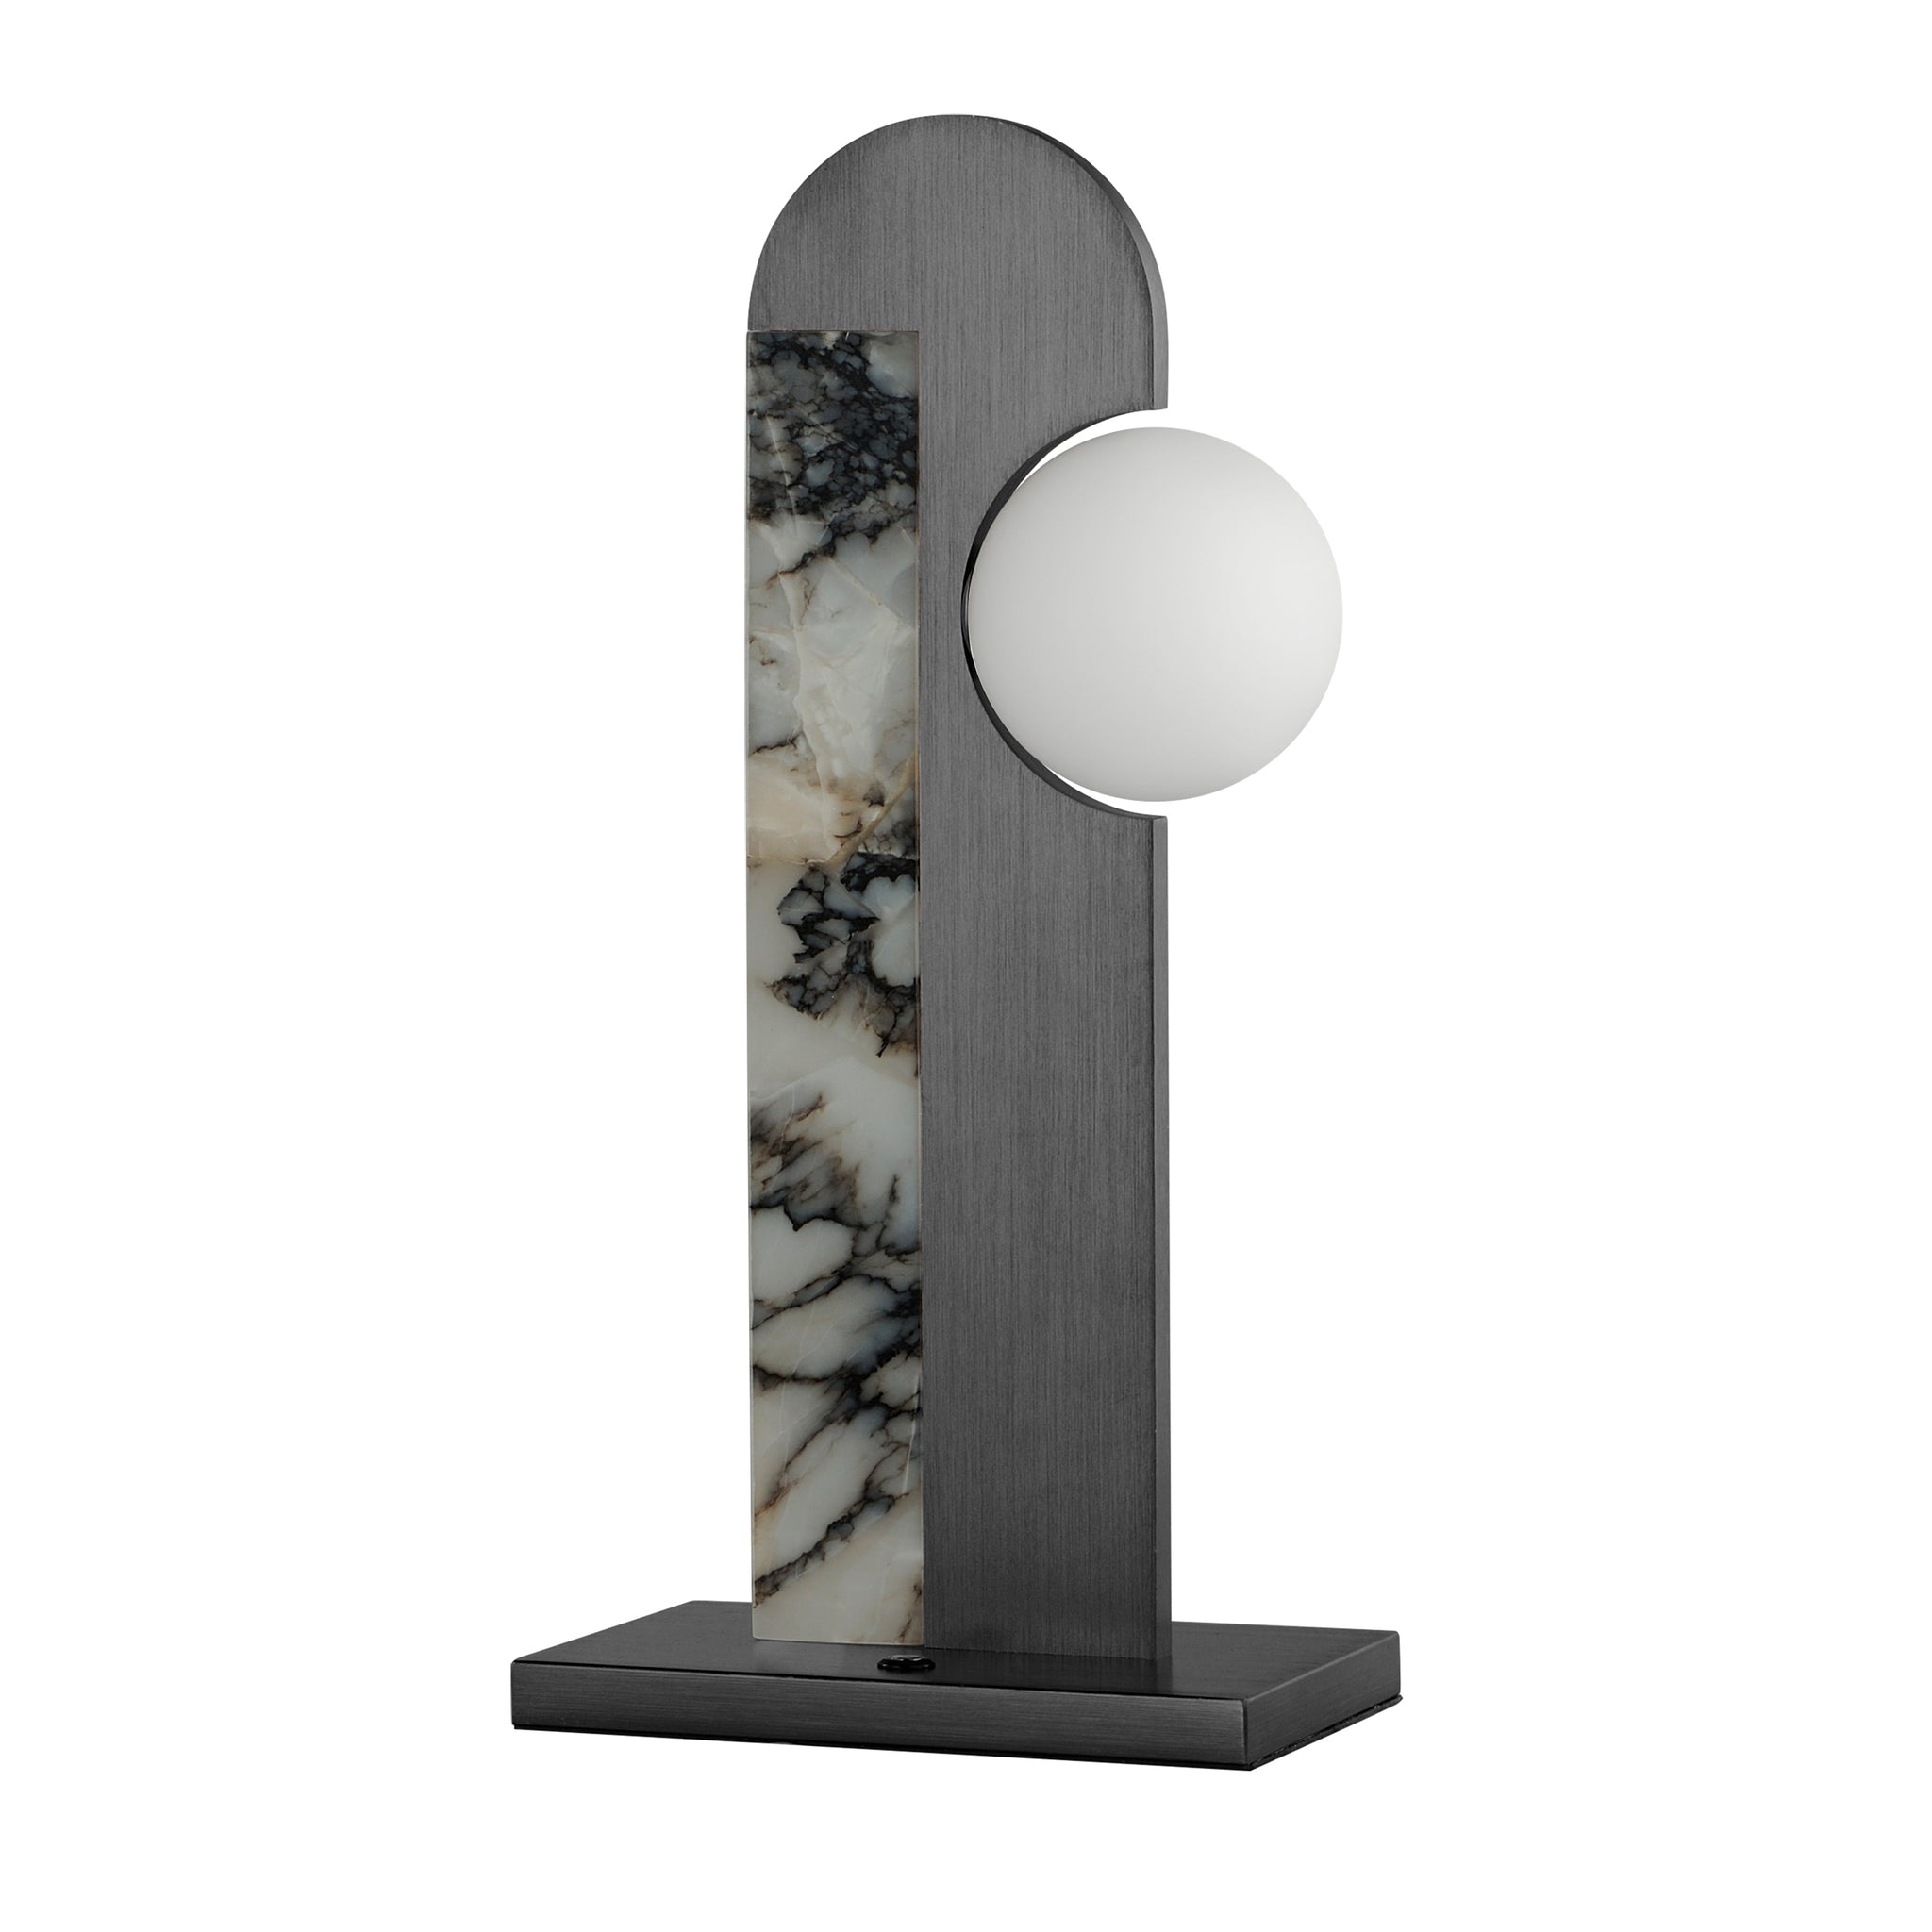 New Age Table Lamp